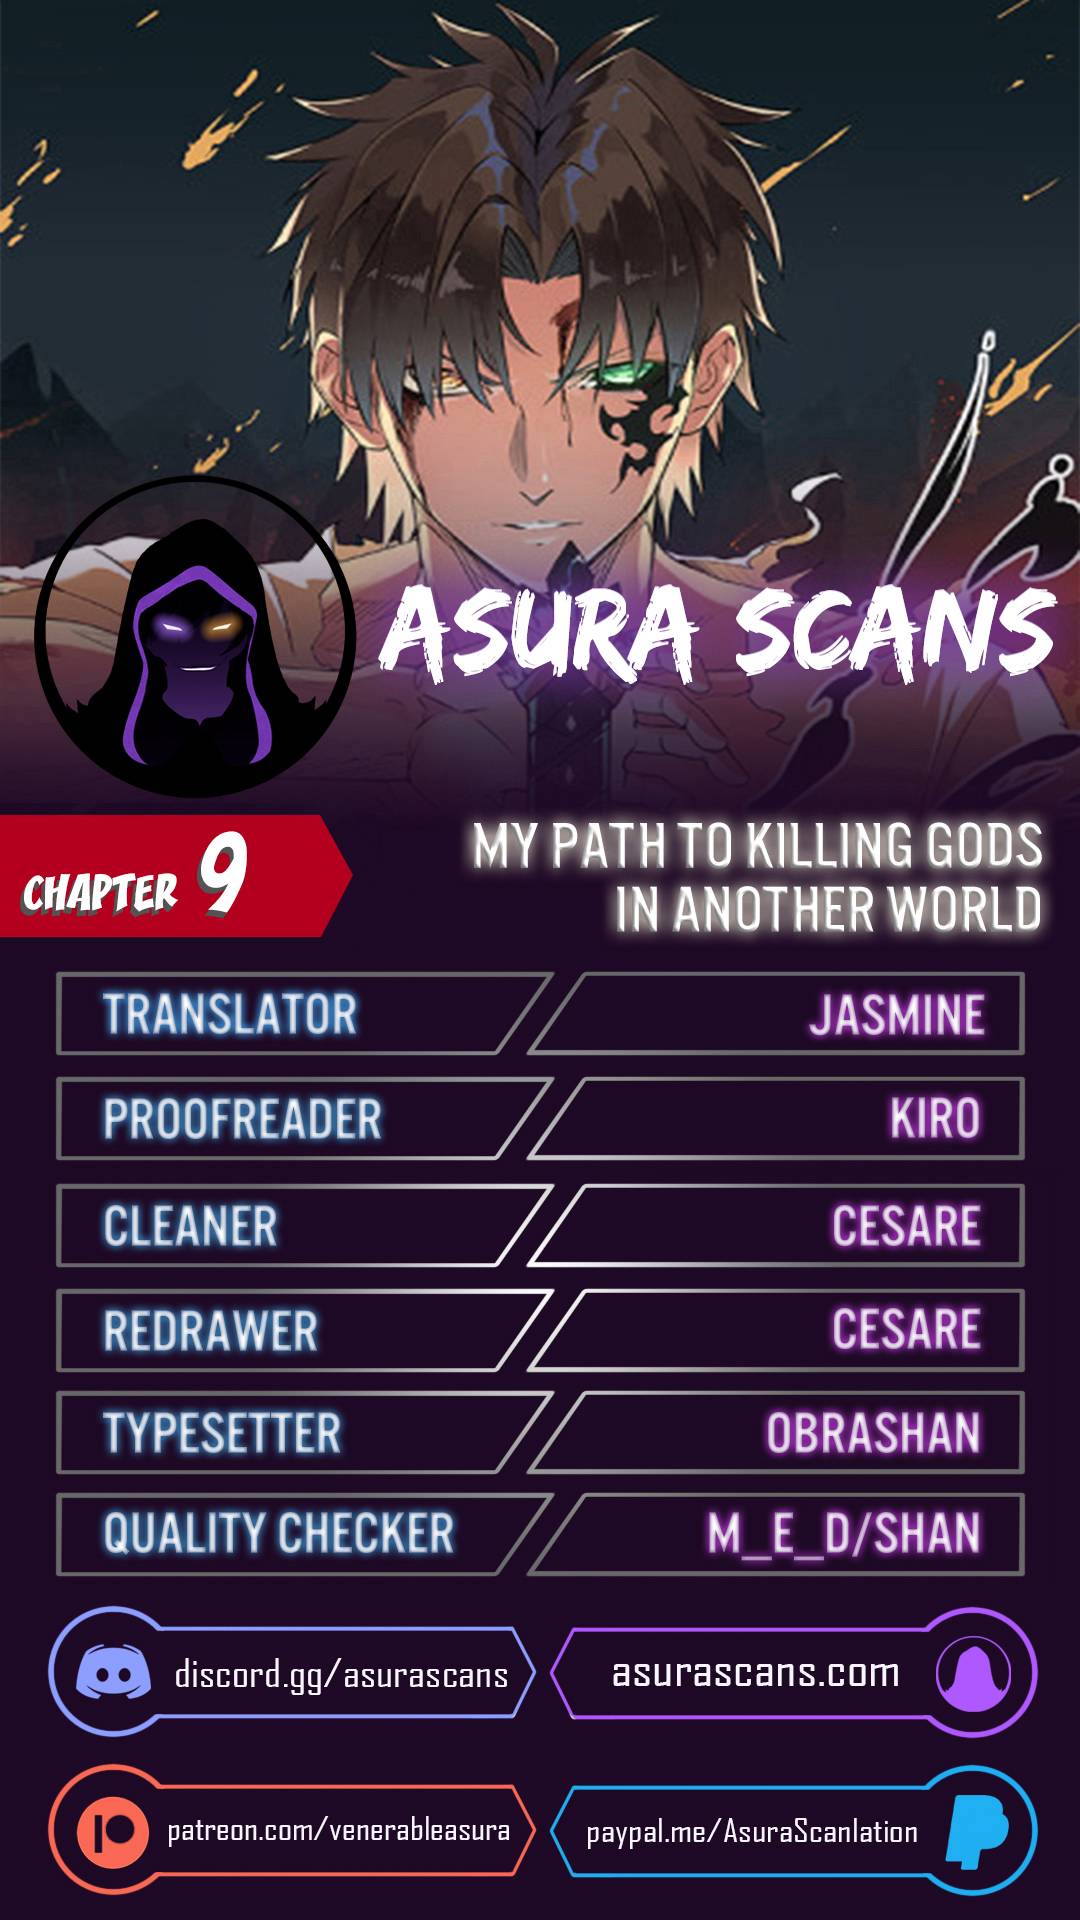 My Way Of Killing Gods In Another World Chapter 9